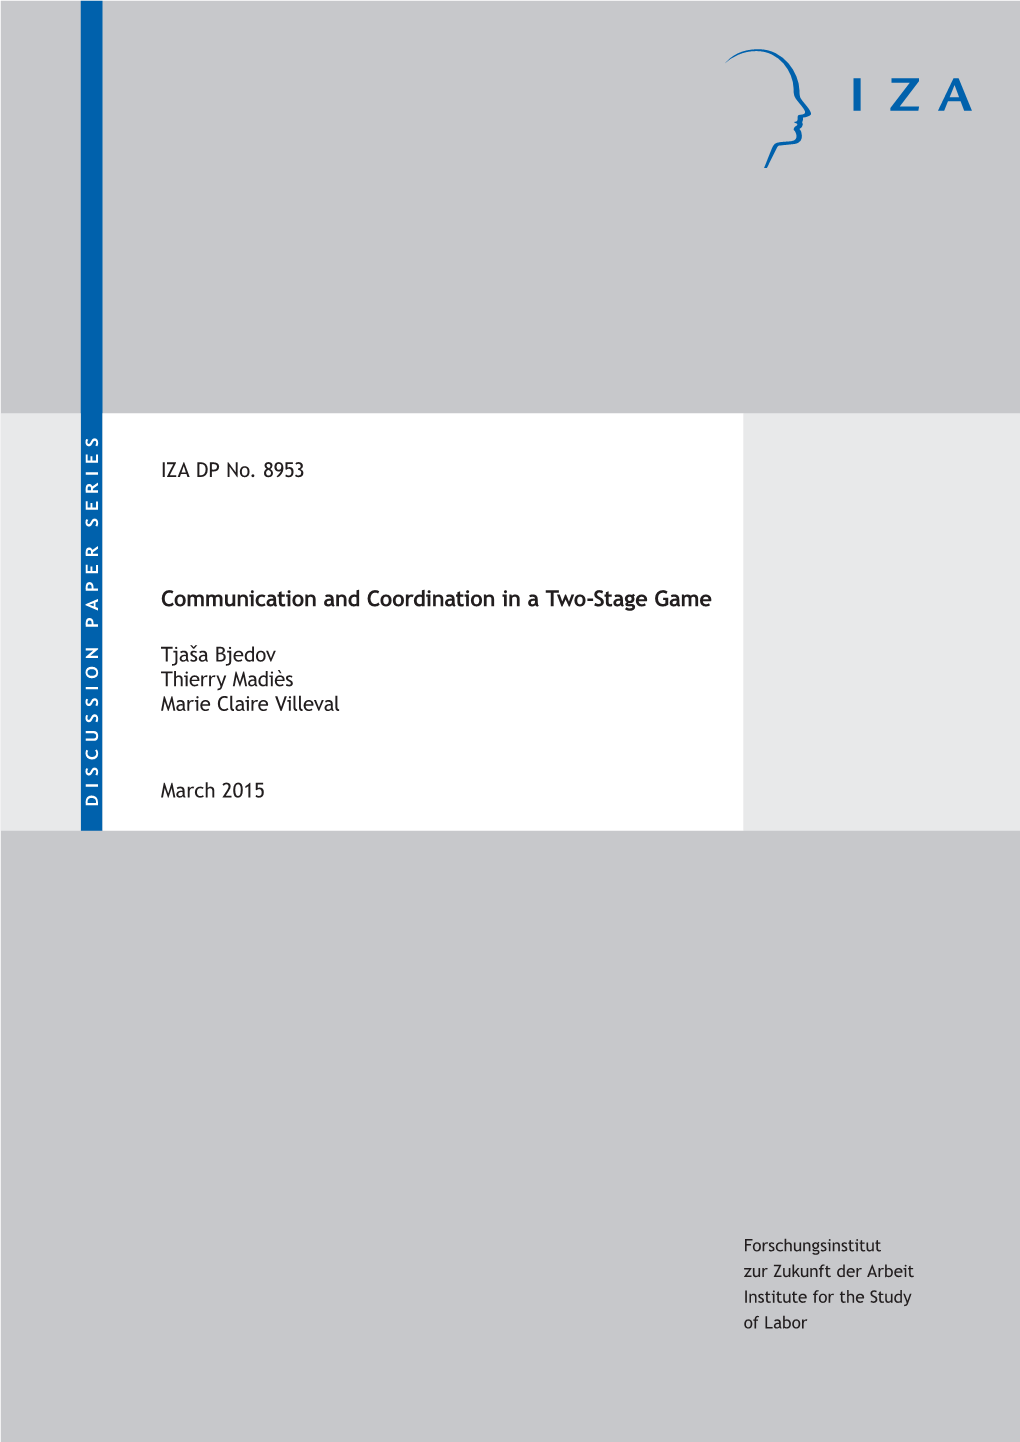 Communication and Coordination in a Two-Stage Game